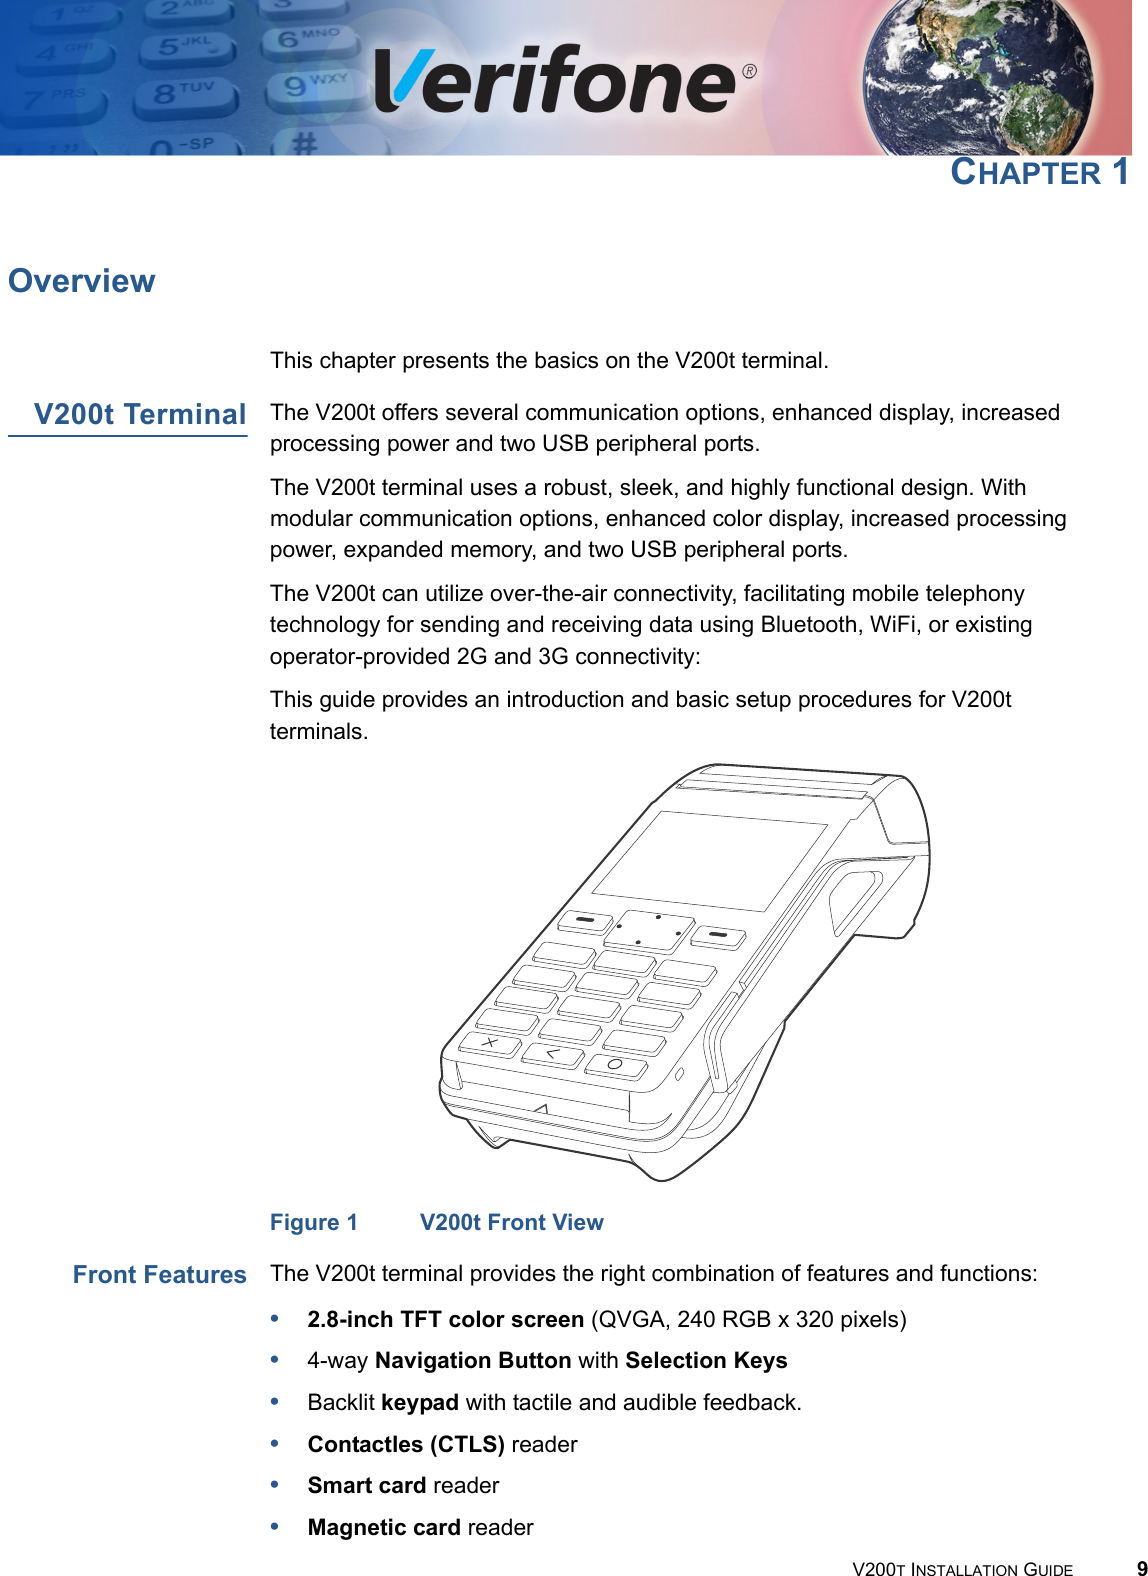 V200T INSTALLATION GUIDE 9CHAPTER 1OverviewThis chapter presents the basics on the V200t terminal.V200t Terminal The V200t offers several communication options, enhanced display, increased processing power and two USB peripheral ports.The V200t terminal uses a robust, sleek, and highly functional design. With modular communication options, enhanced color display, increased processing power, expanded memory, and two USB peripheral ports.The V200t can utilize over-the-air connectivity, facilitating mobile telephony technology for sending and receiving data using Bluetooth, WiFi, or existing operator-provided 2G and 3G connectivity:This guide provides an introduction and basic setup procedures for V200t terminals.Figure 1 V200t Front ViewFront Features The V200t terminal provides the right combination of features and functions:•2.8-inch TFT color screen (QVGA, 240 RGB x 320 pixels) •4-way Navigation Button with Selection Keys•Backlit keypad with tactile and audible feedback.•Contactles (CTLS) reader•Smart card reader•Magnetic card reader